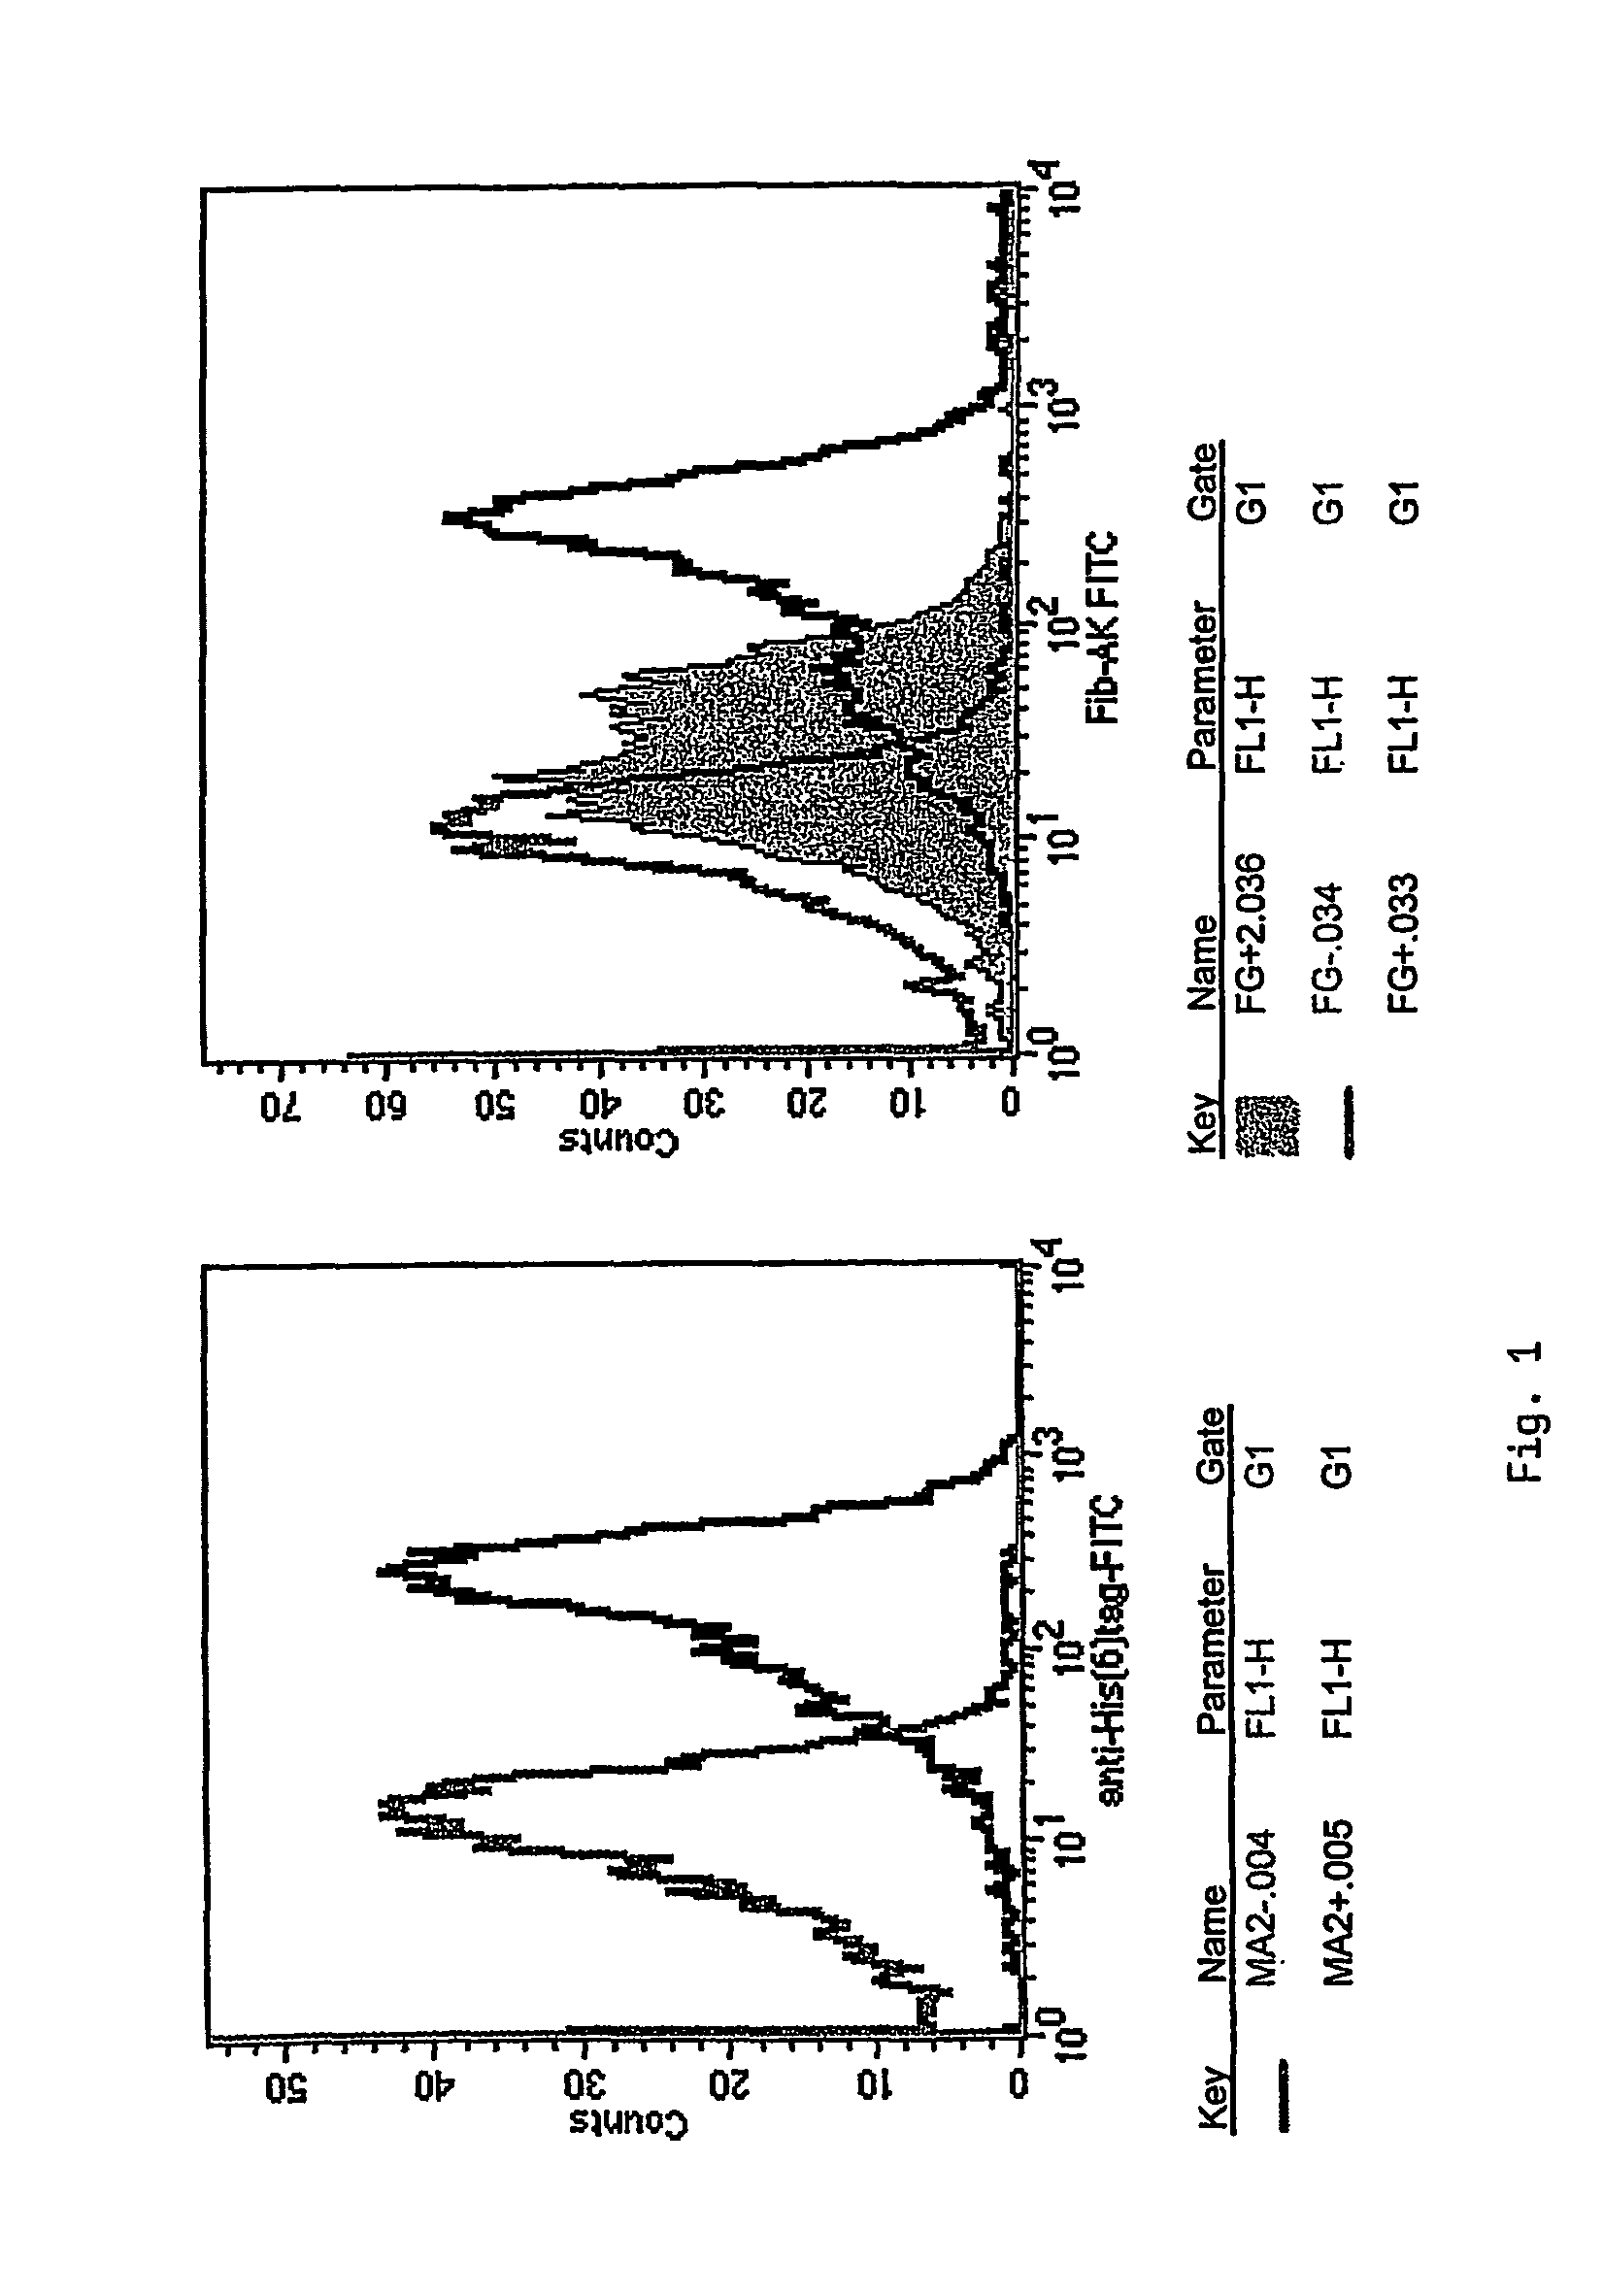 Antibody of human origin specifically binding to activated state of platelet integrin receptor GPIIb/IIIa